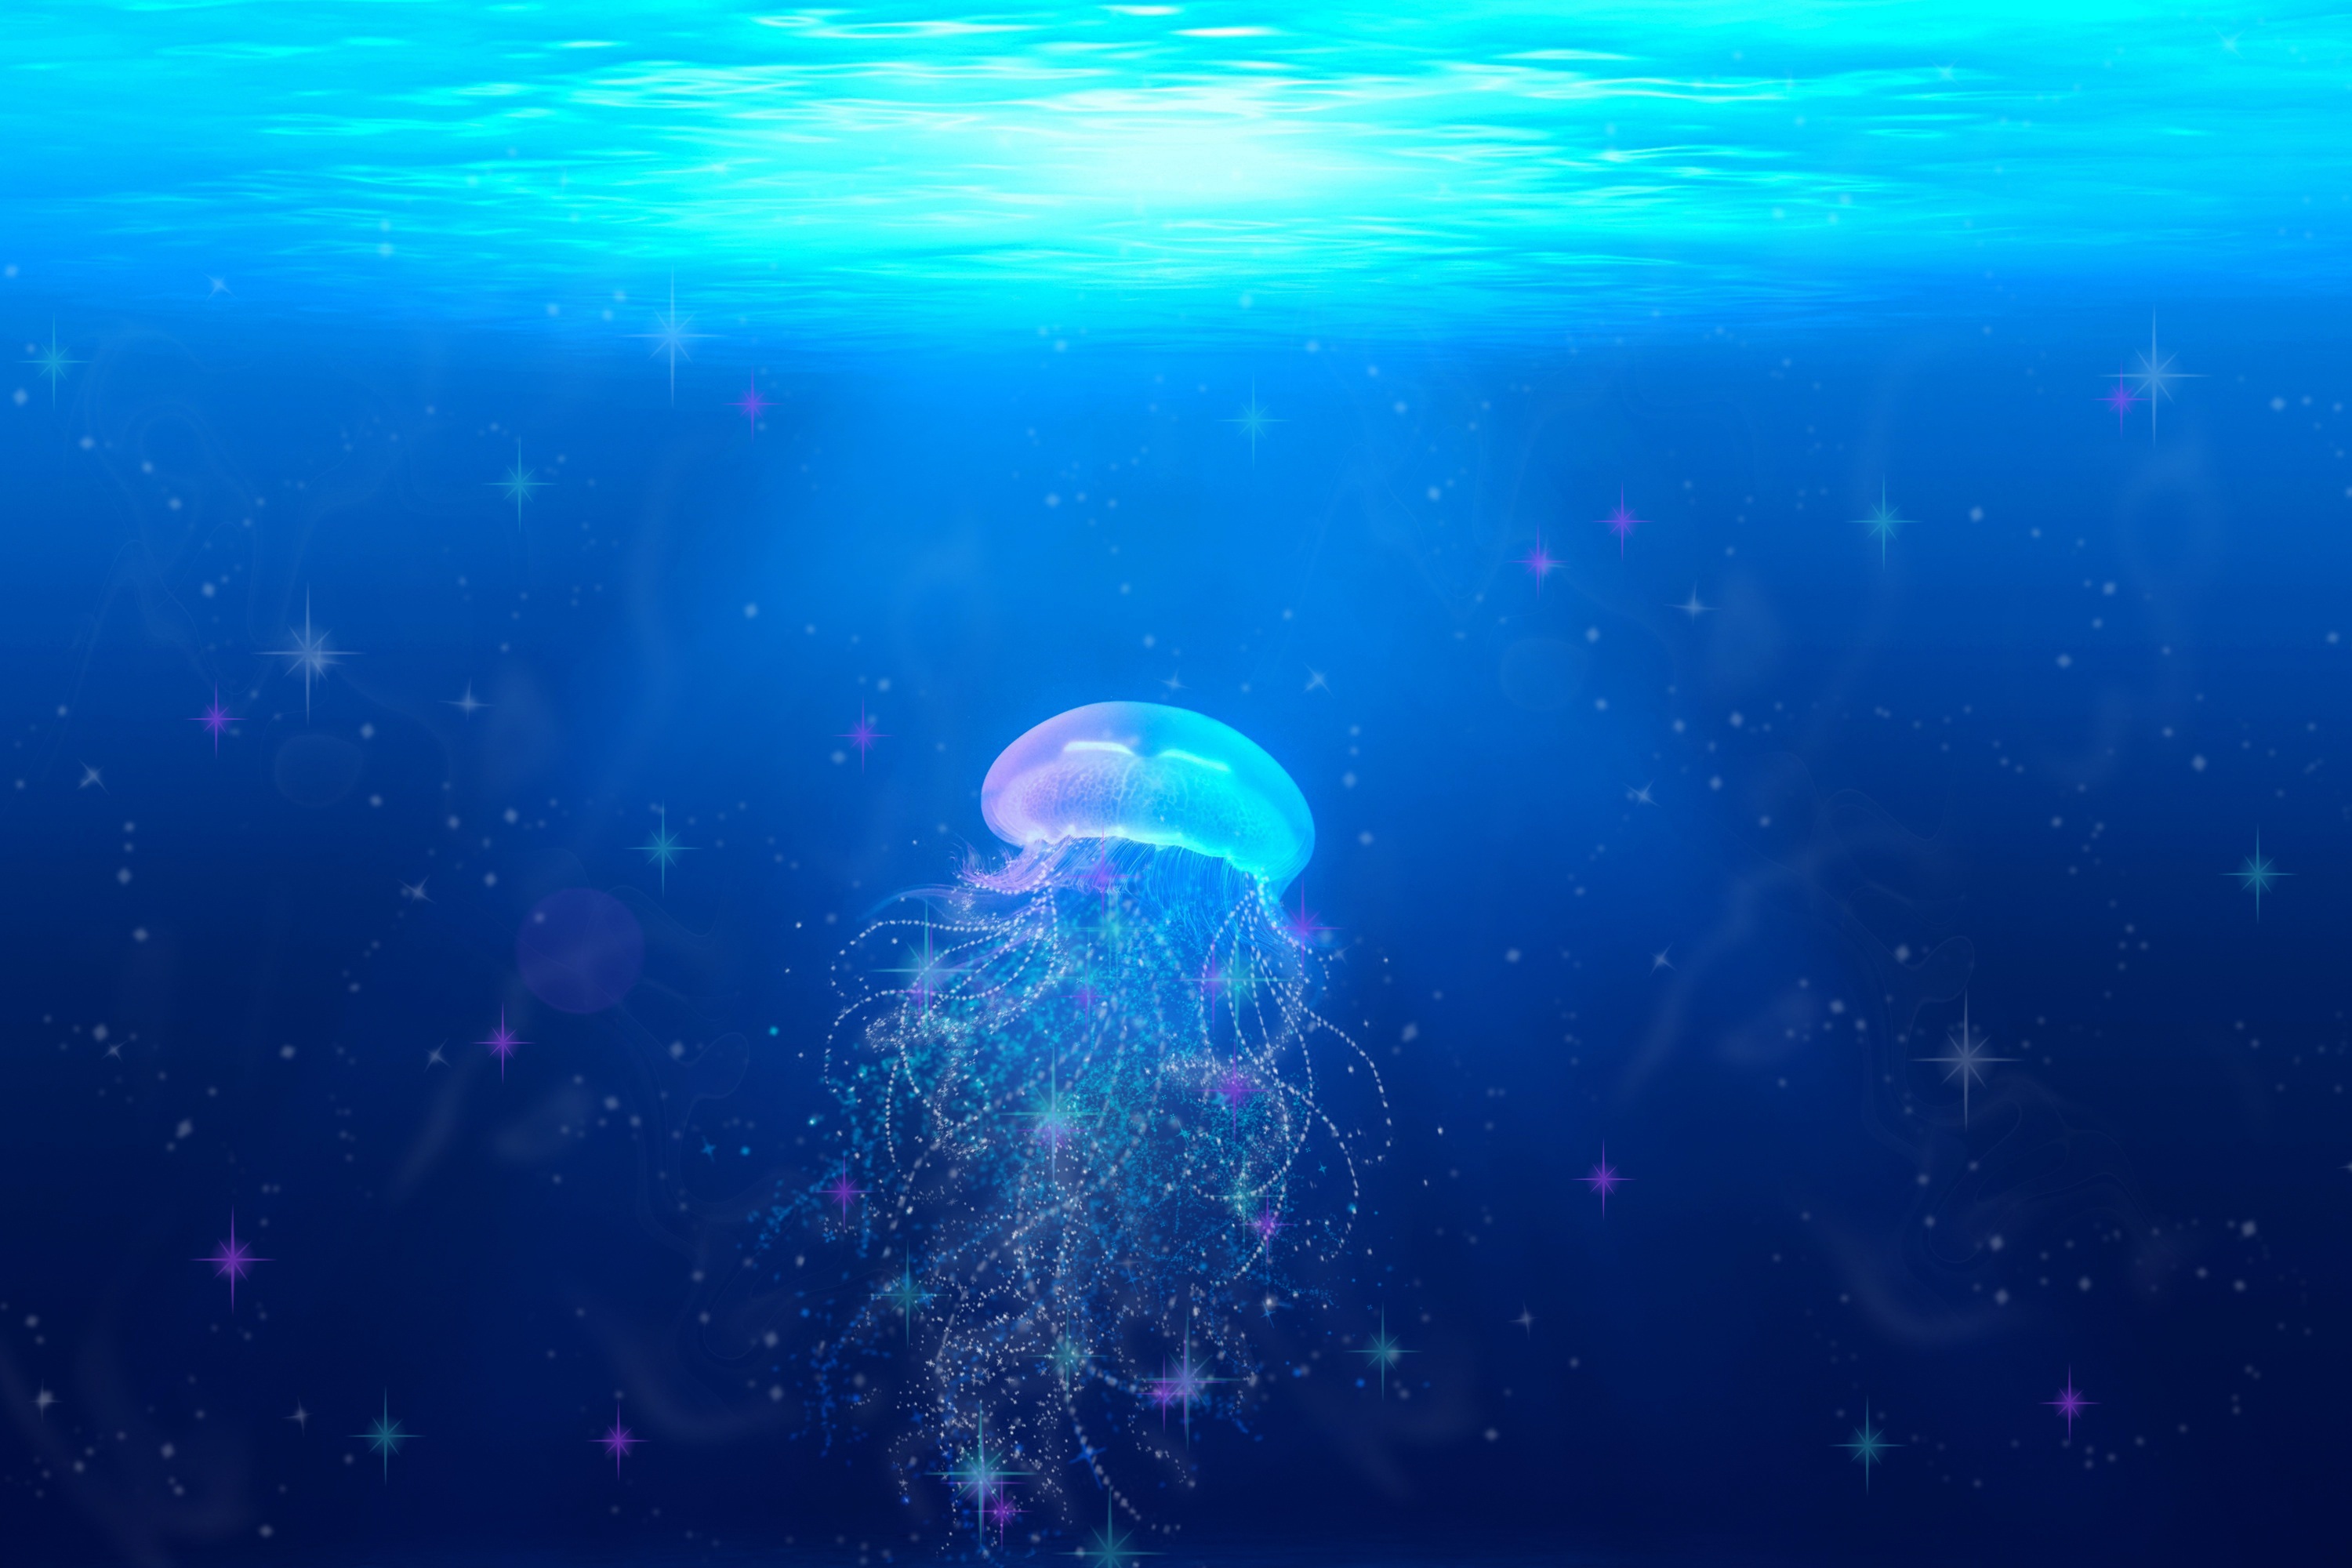  Underwater HQ Background Images